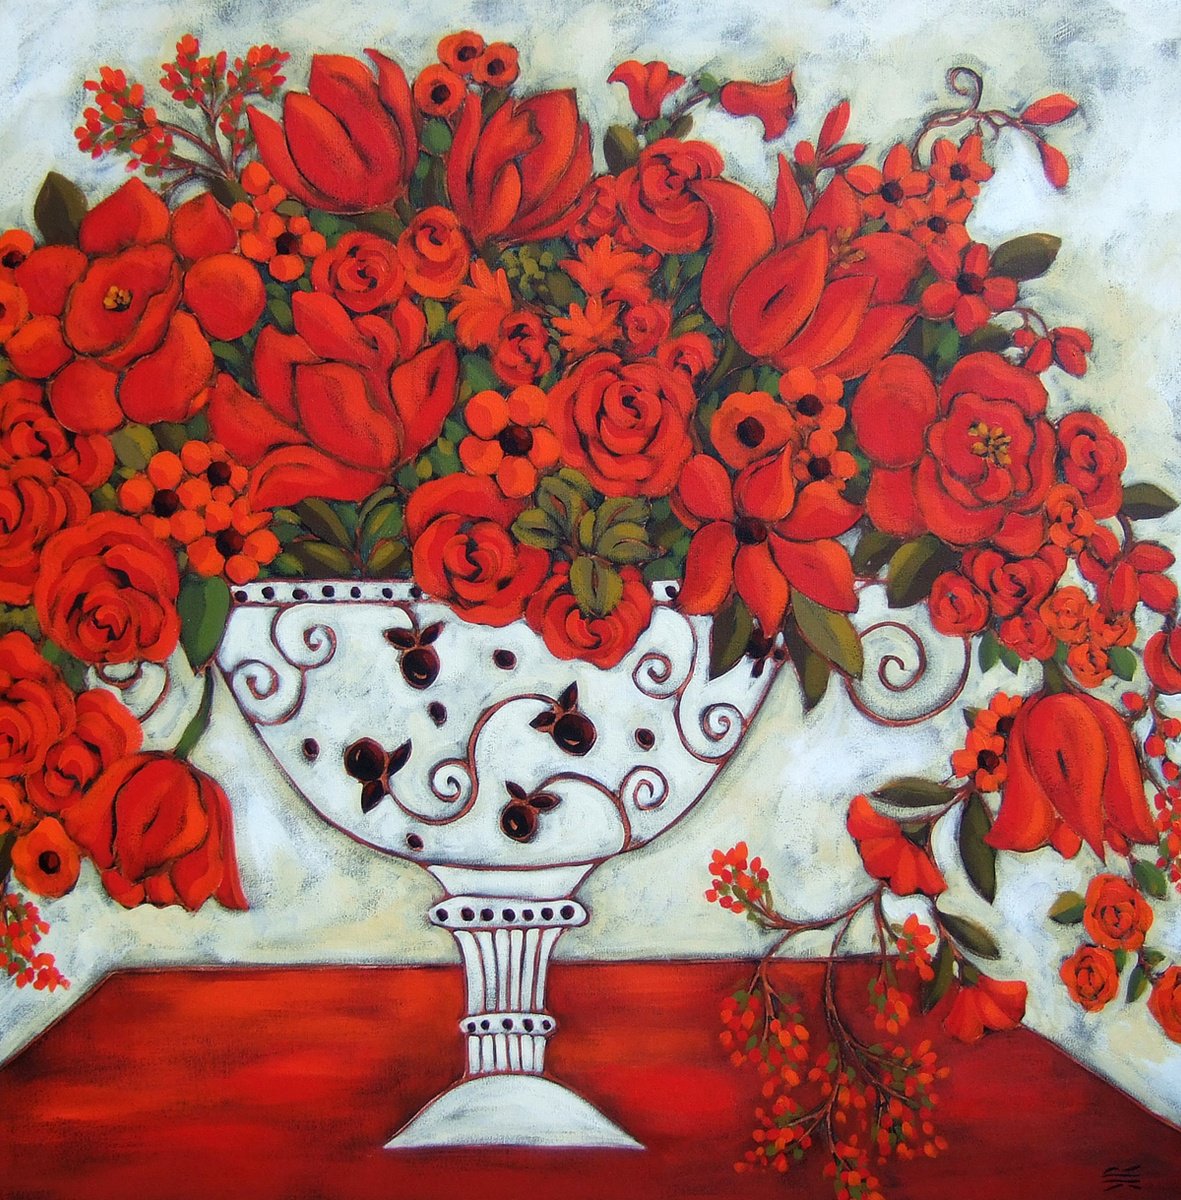 Ivory Vase with Red Tulips by Karen Rieger